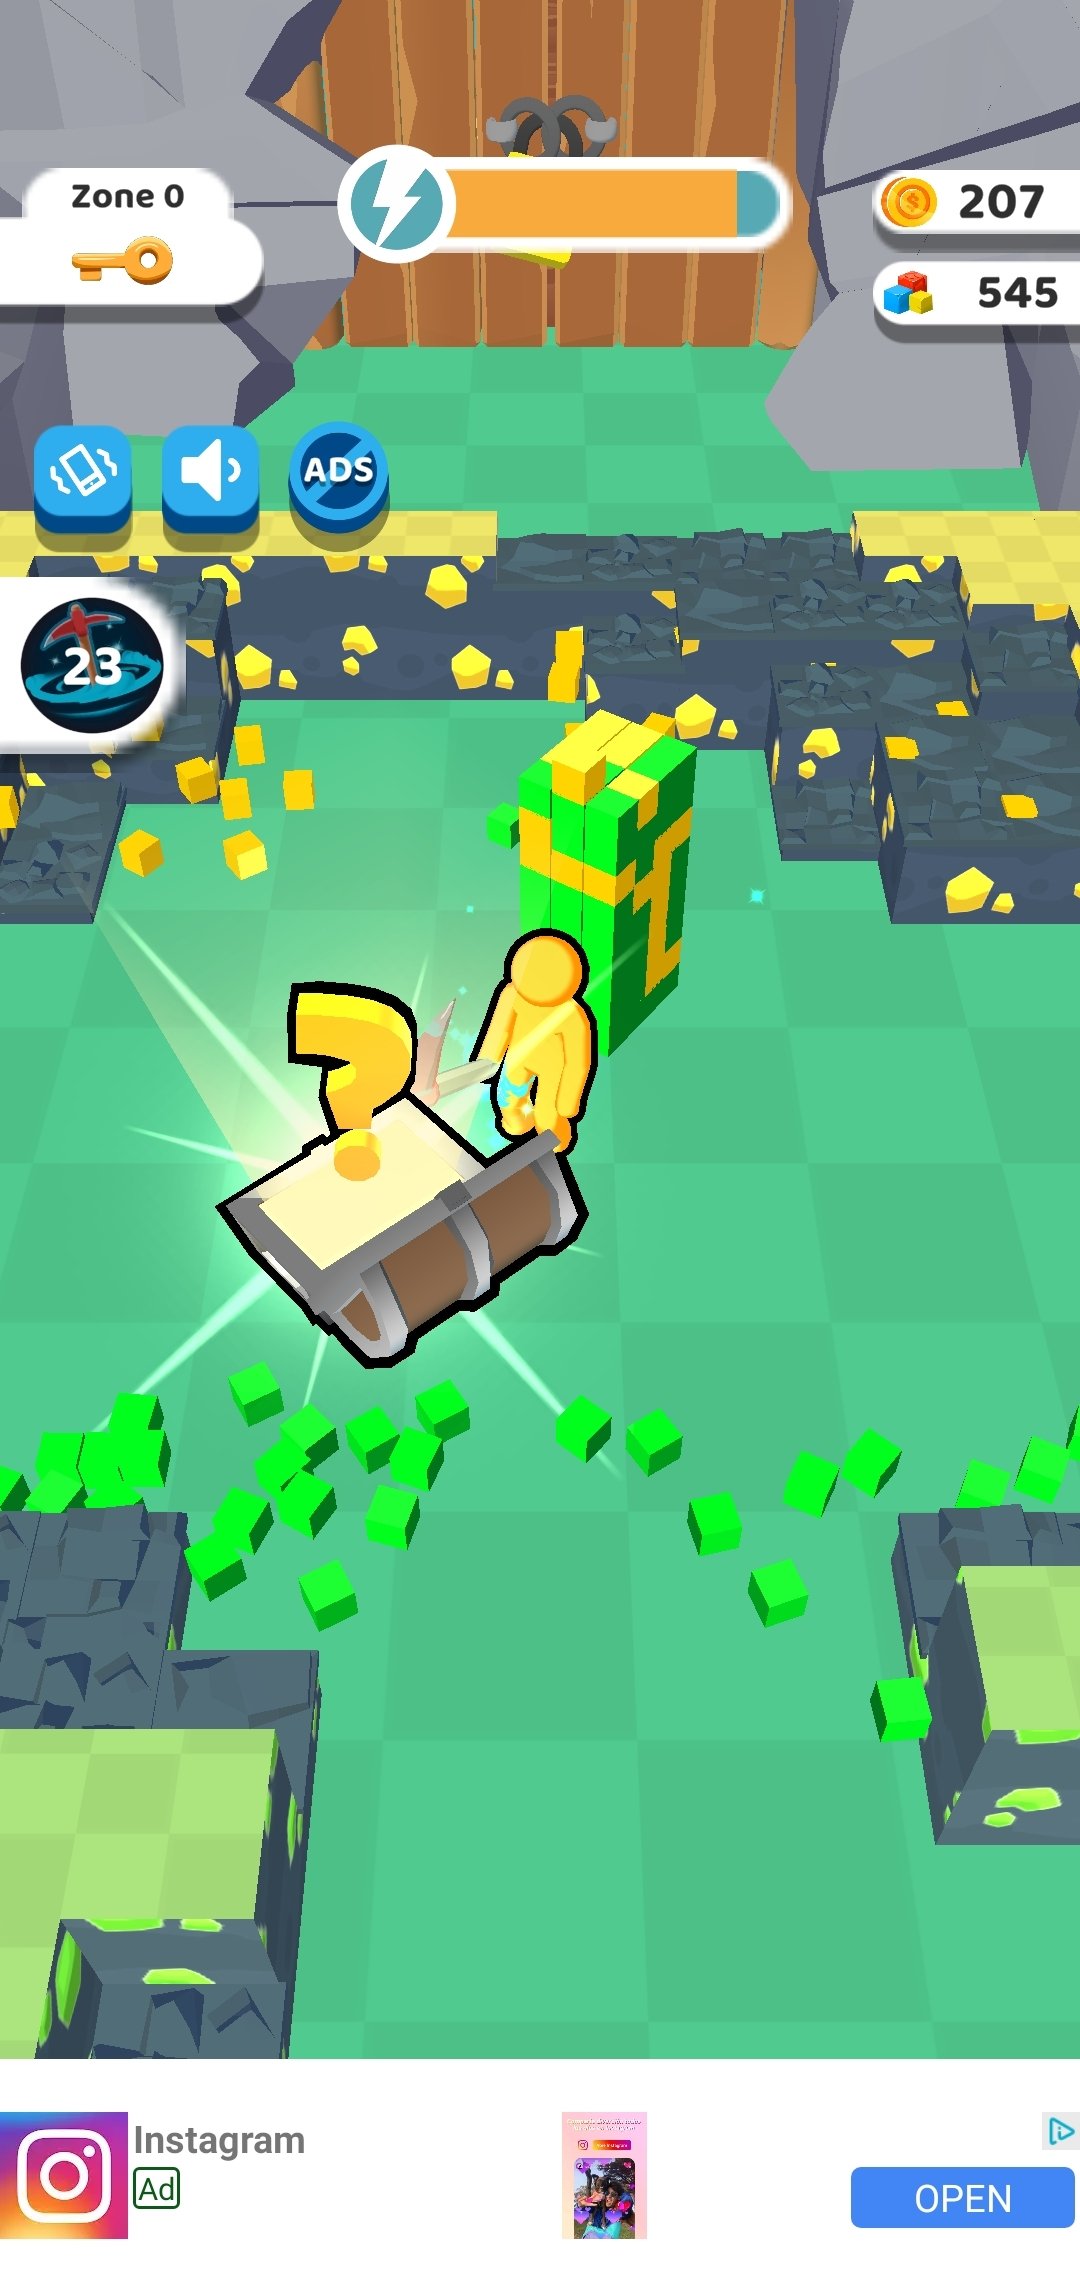 Treasure Miner - A free mining adventure - APK Download for Android